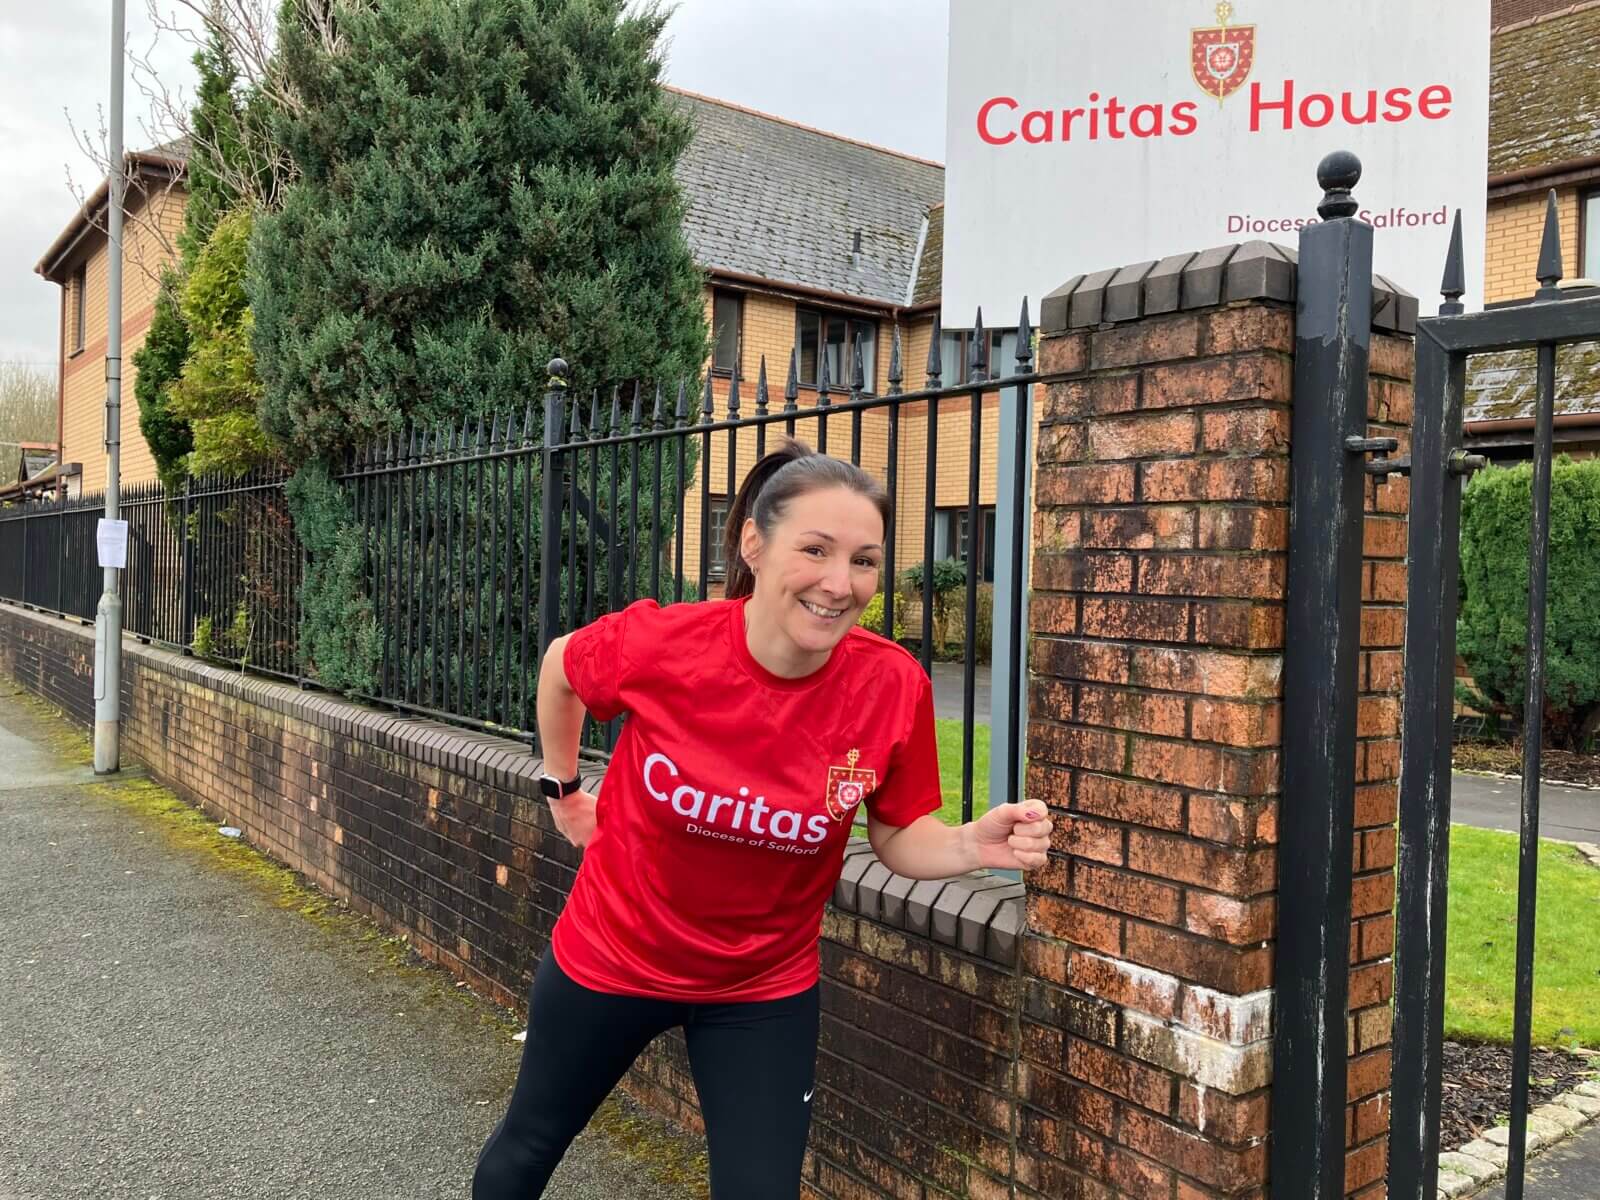 Person in red Caritas branded tshirt running in front of Caritas House building